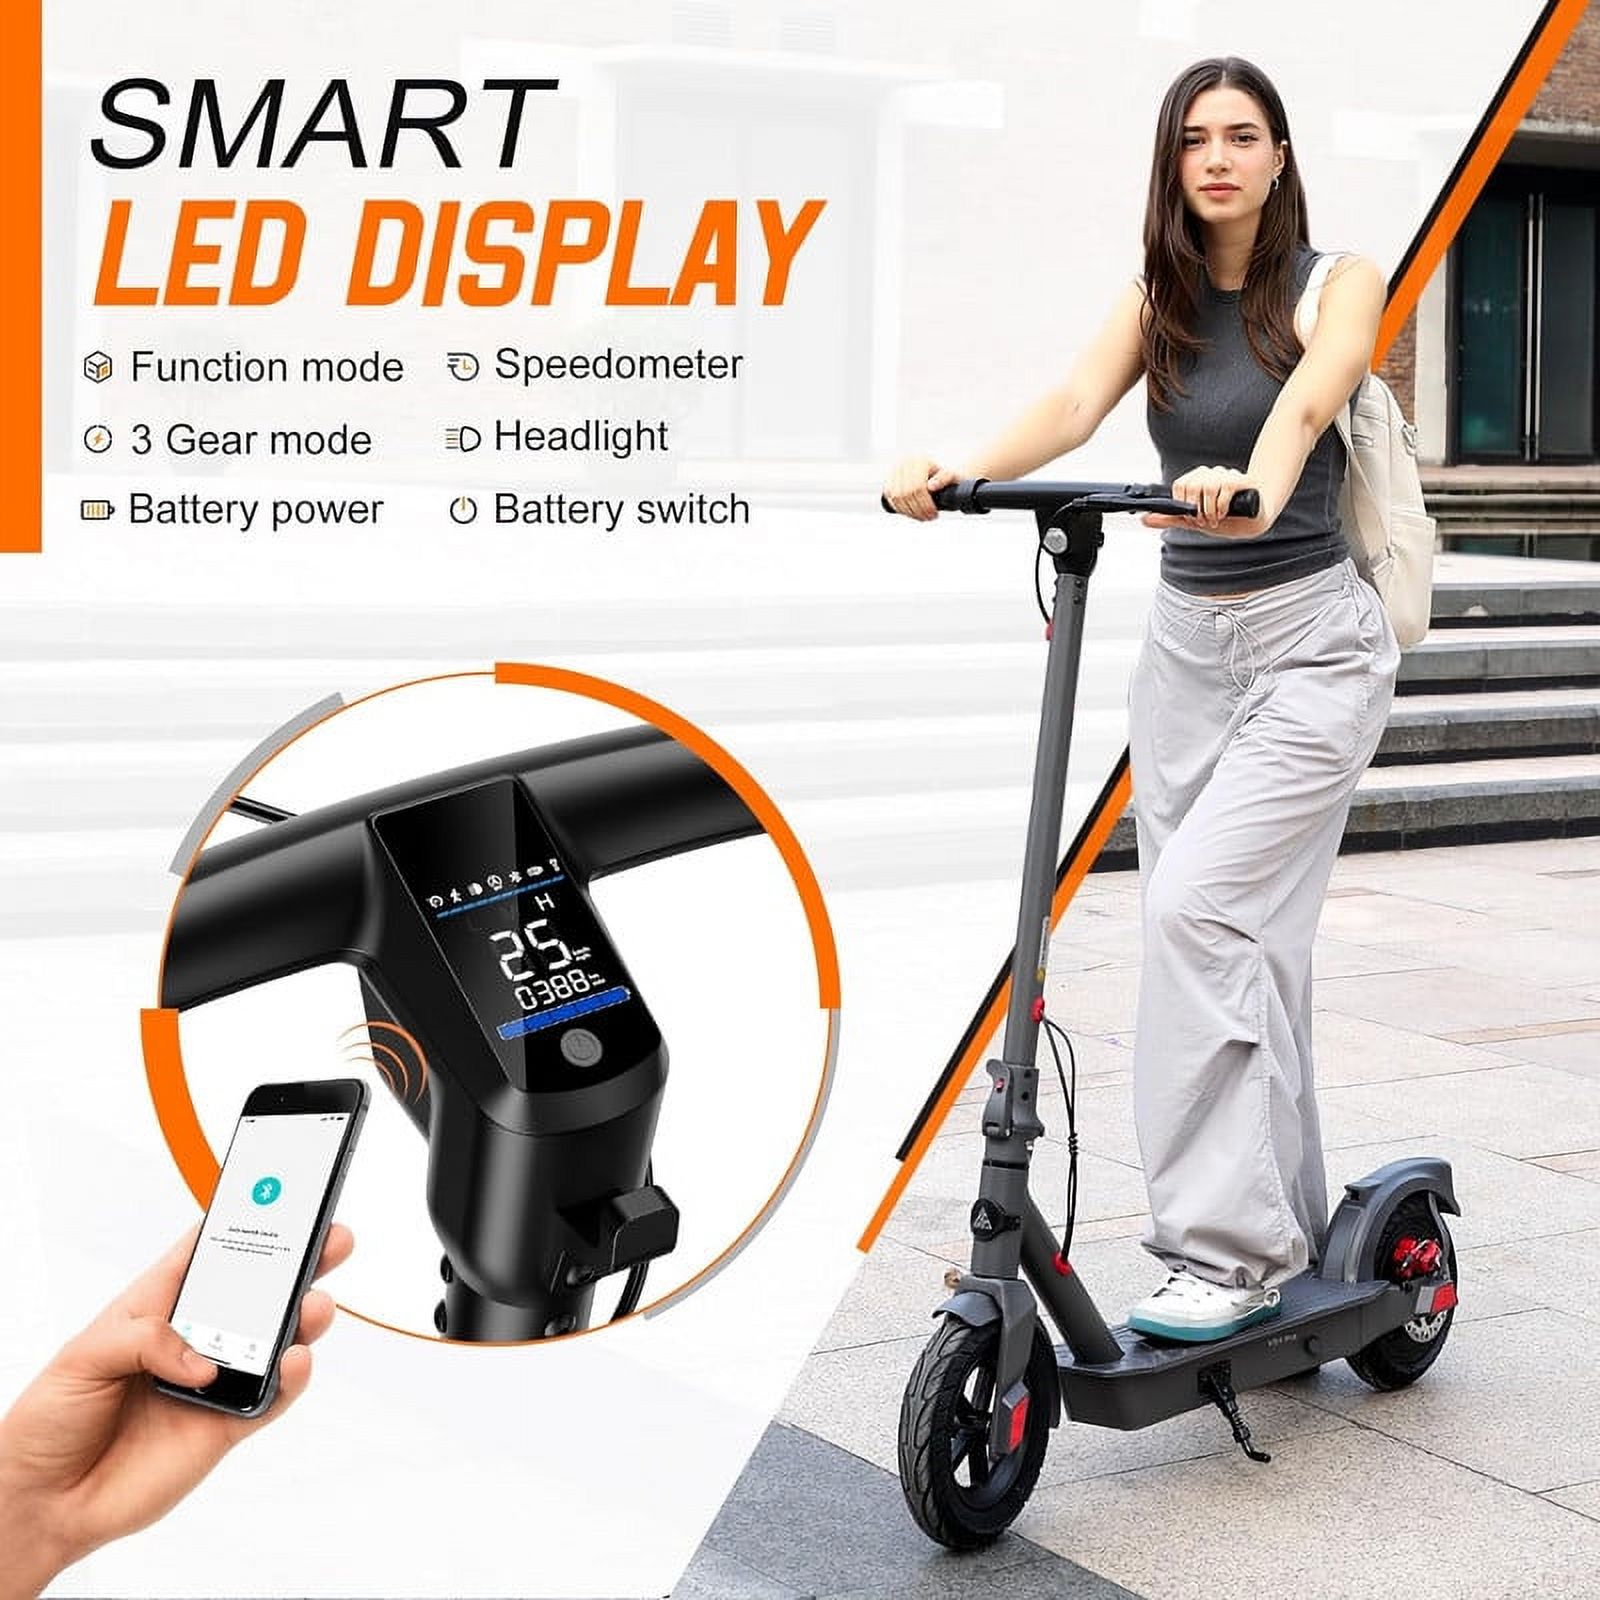 TST VS4 Pro Electric Scooter, 10" Pneumatic Tire, 500W Motor, Max 20 Mile Range, 19 MPH, Digital Display and Cruise Control Foldable E-Scooter for Adults - image 5 of 8